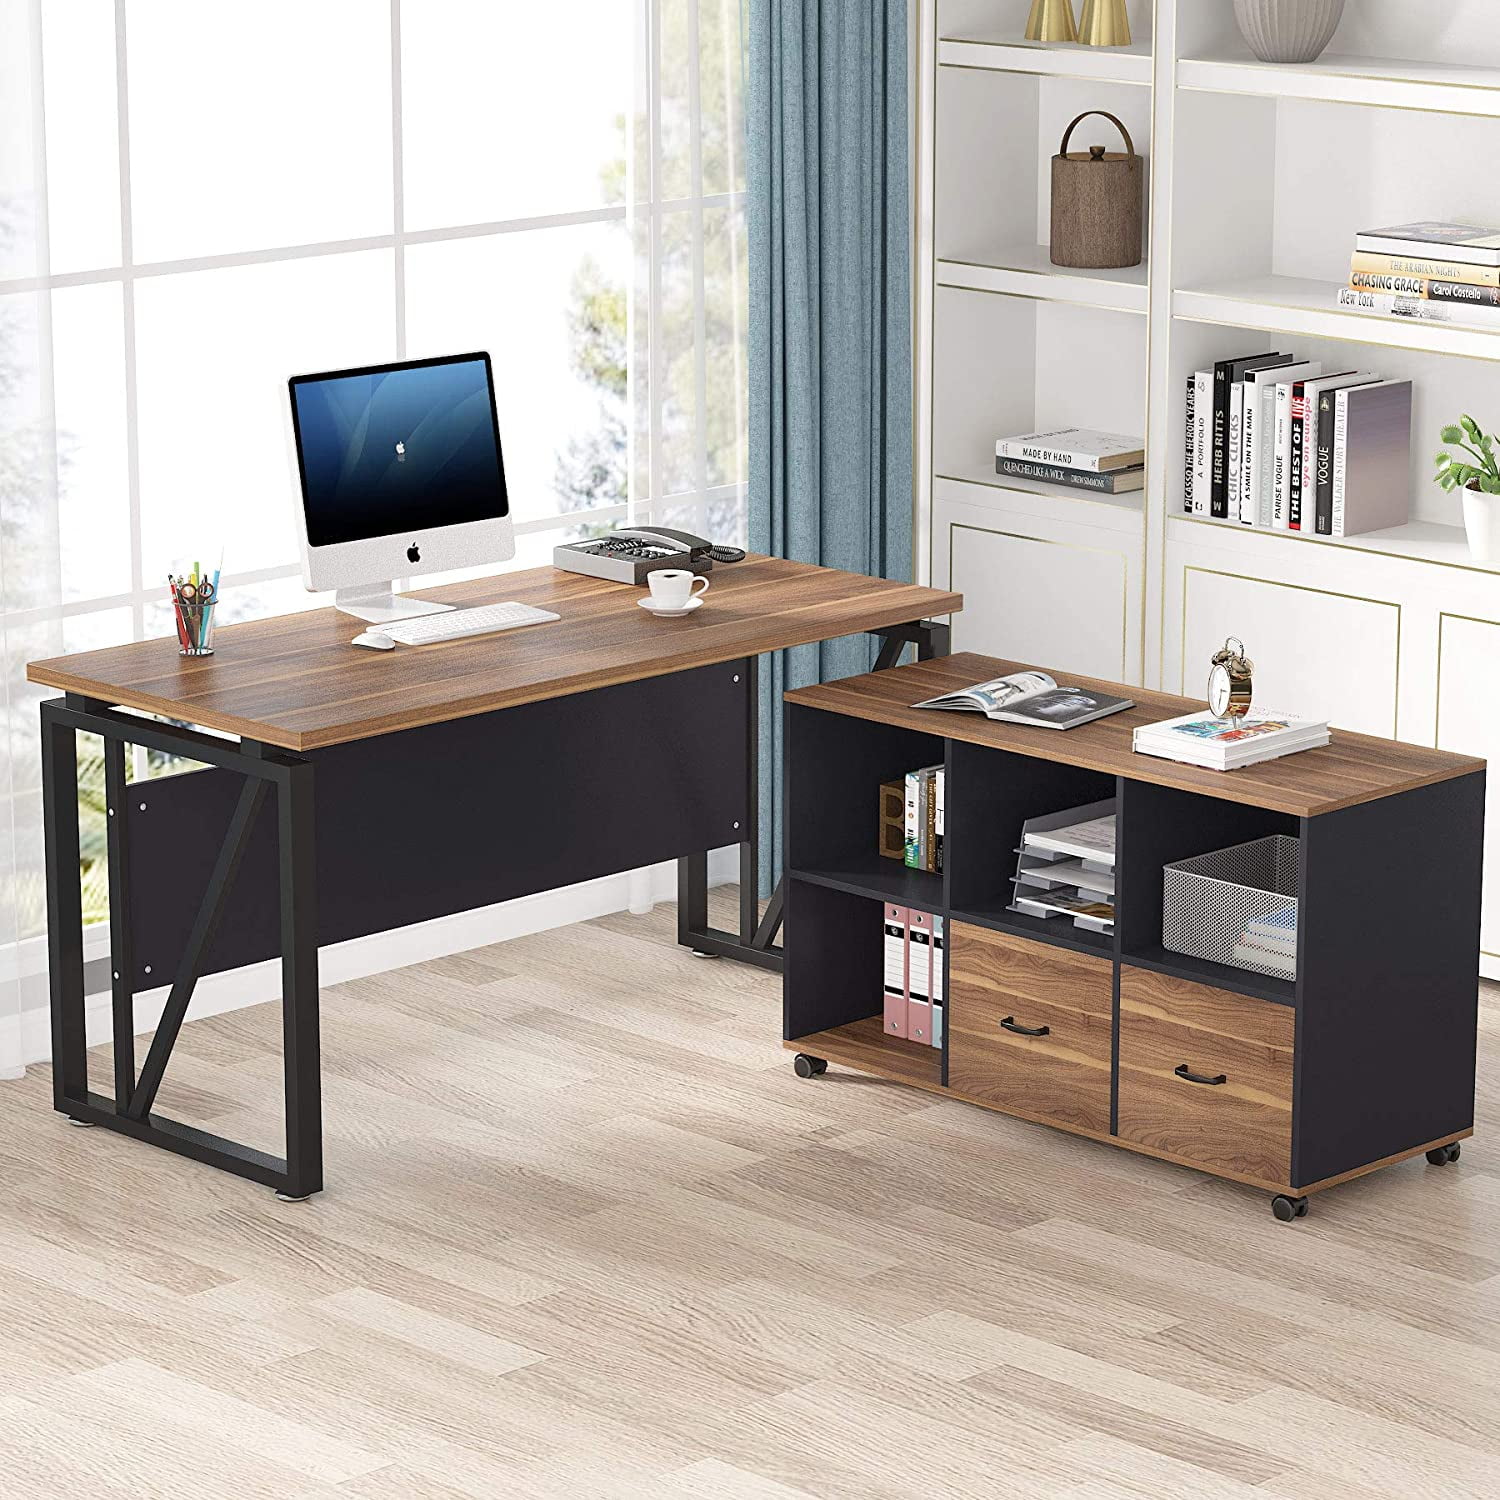 Buy Tribesigns L Shaped Computer Desk 55 inches Executive Desk with 